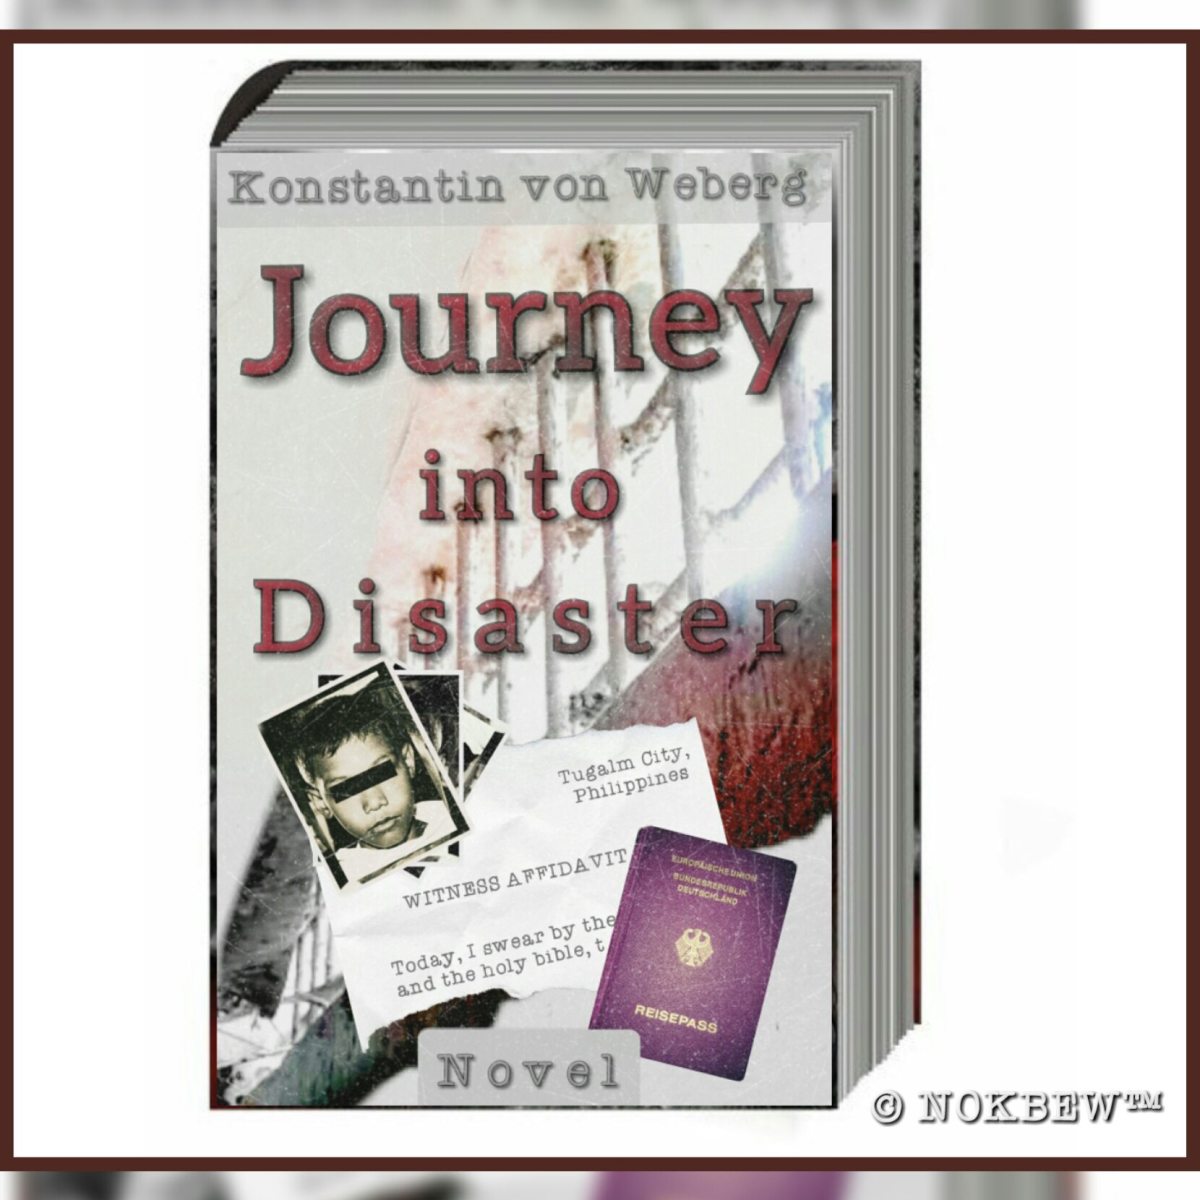 Novel »Journey into Disaster« for free until April. 10th. on Amazon’s Kindle!